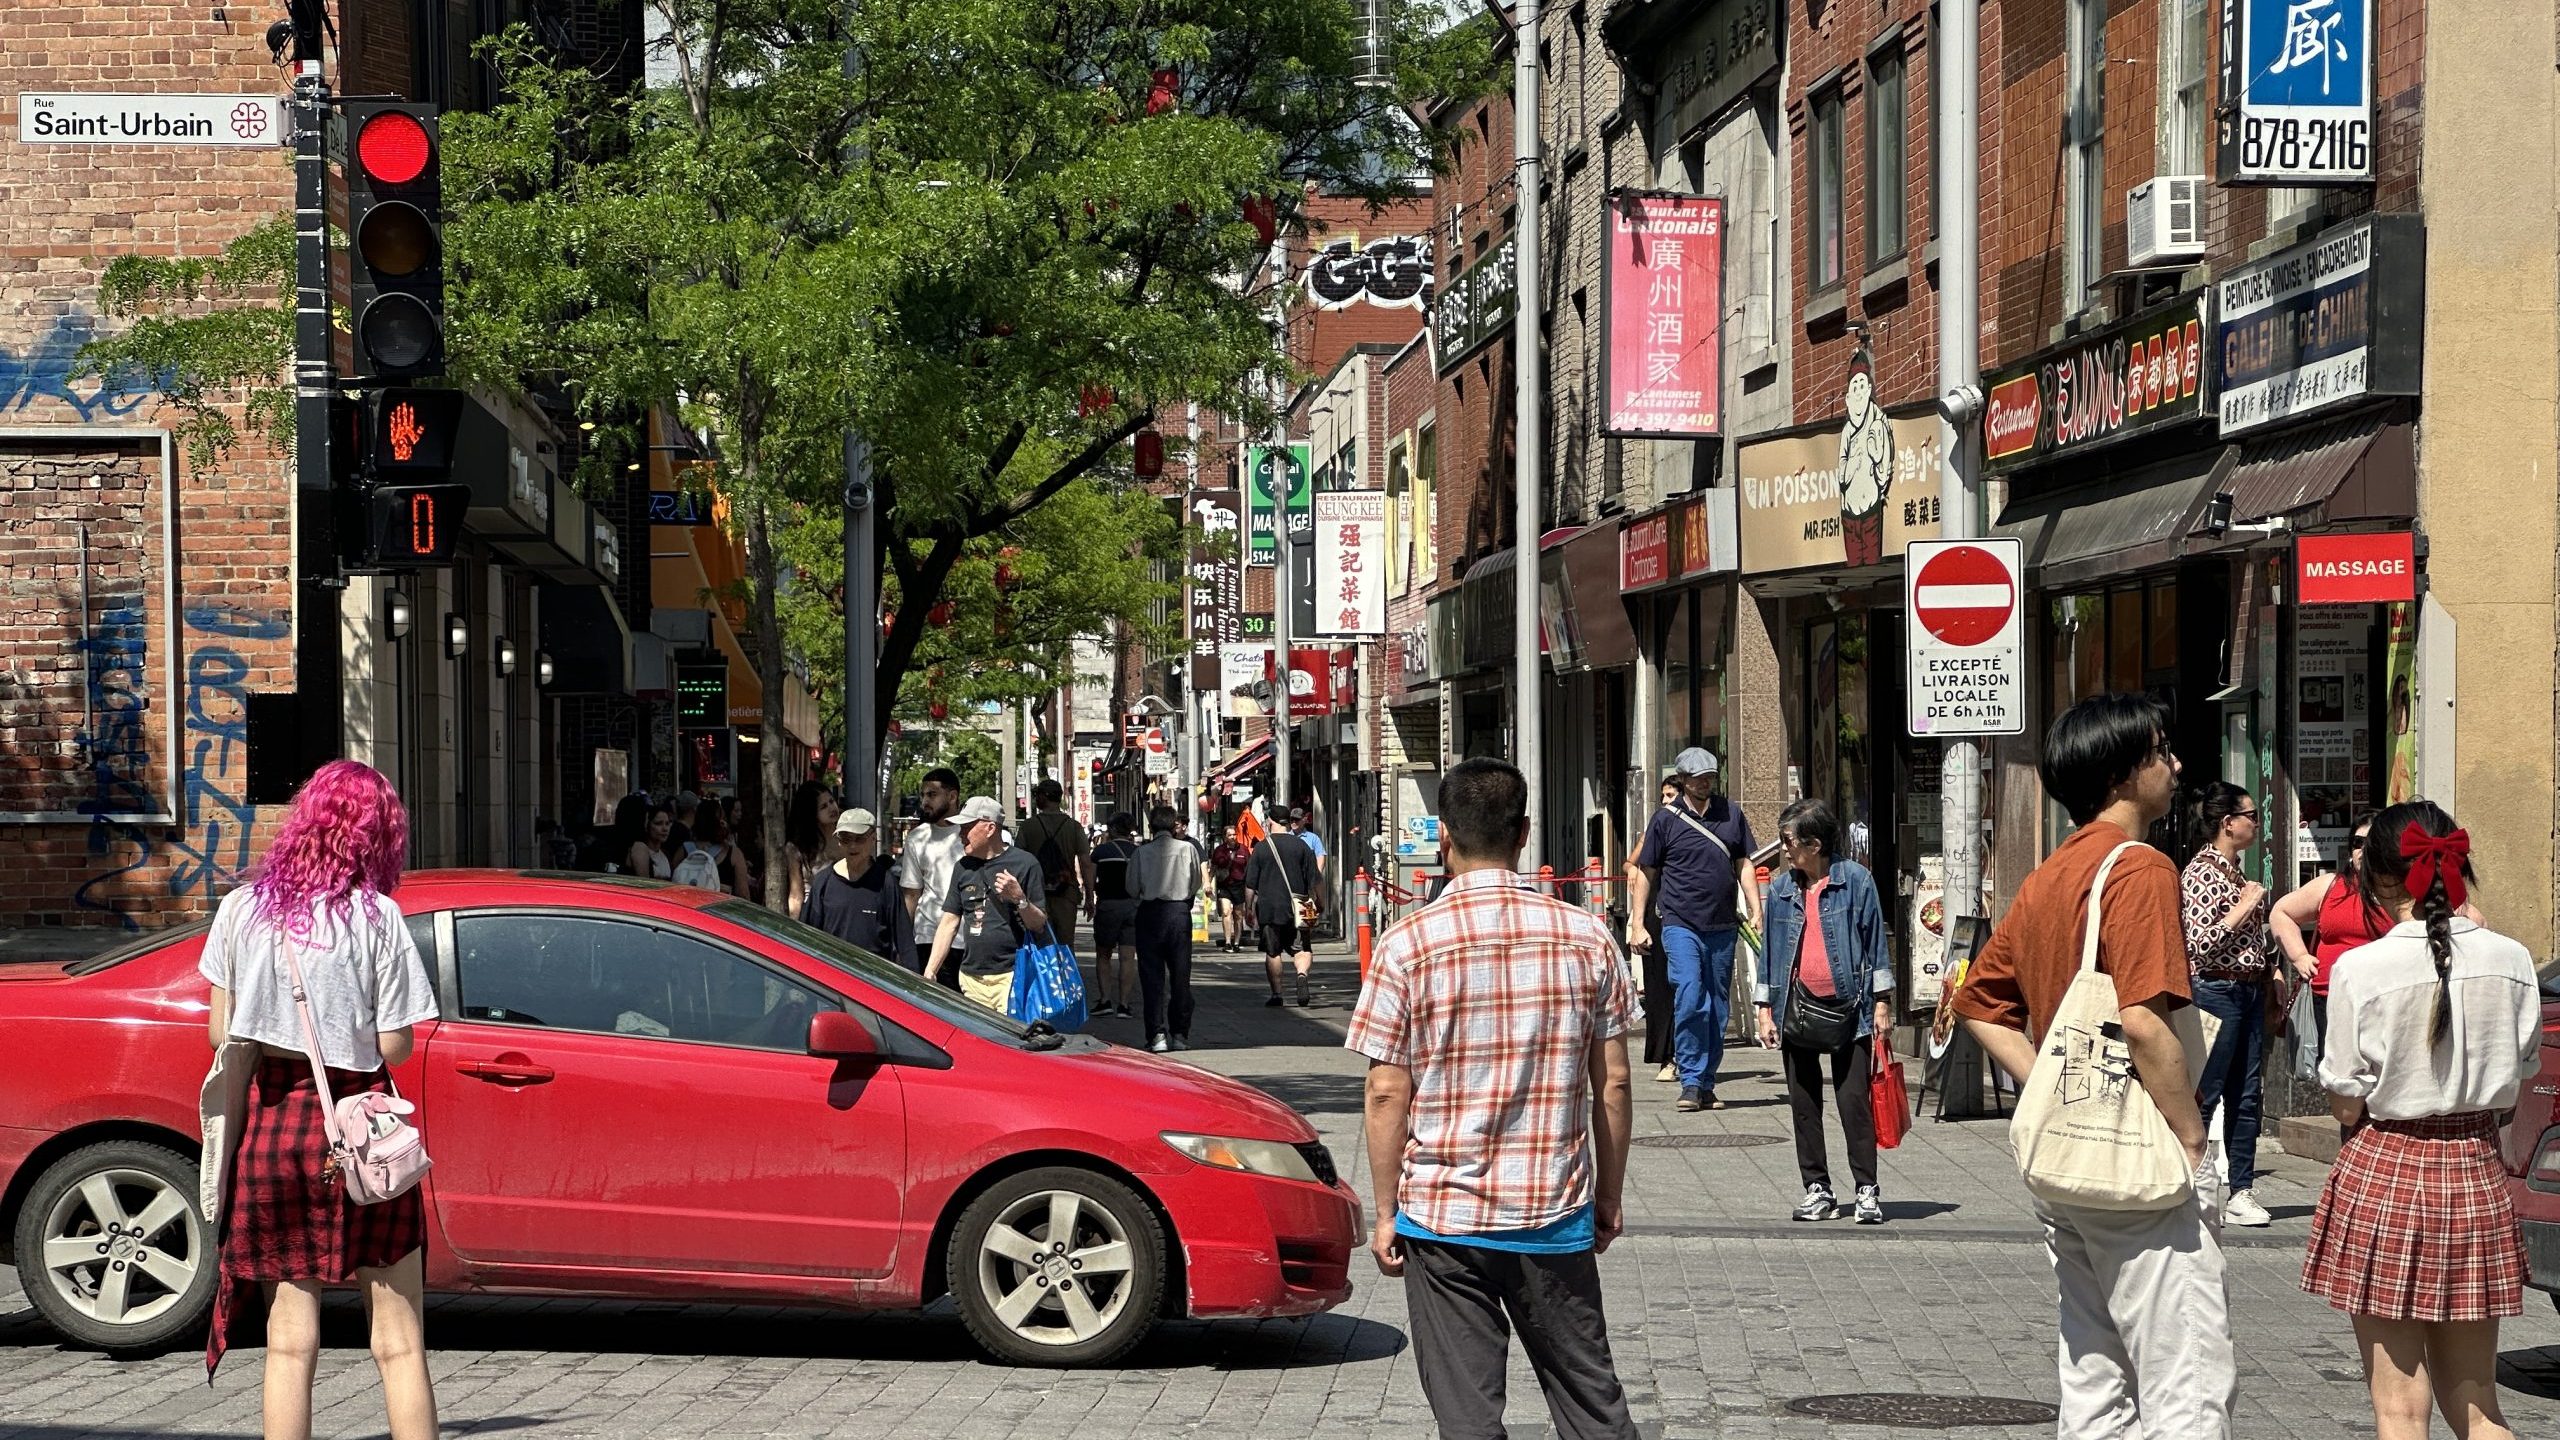 Montreal's Chinatown continues to be concerned over criminal activity | CityNews Montreal